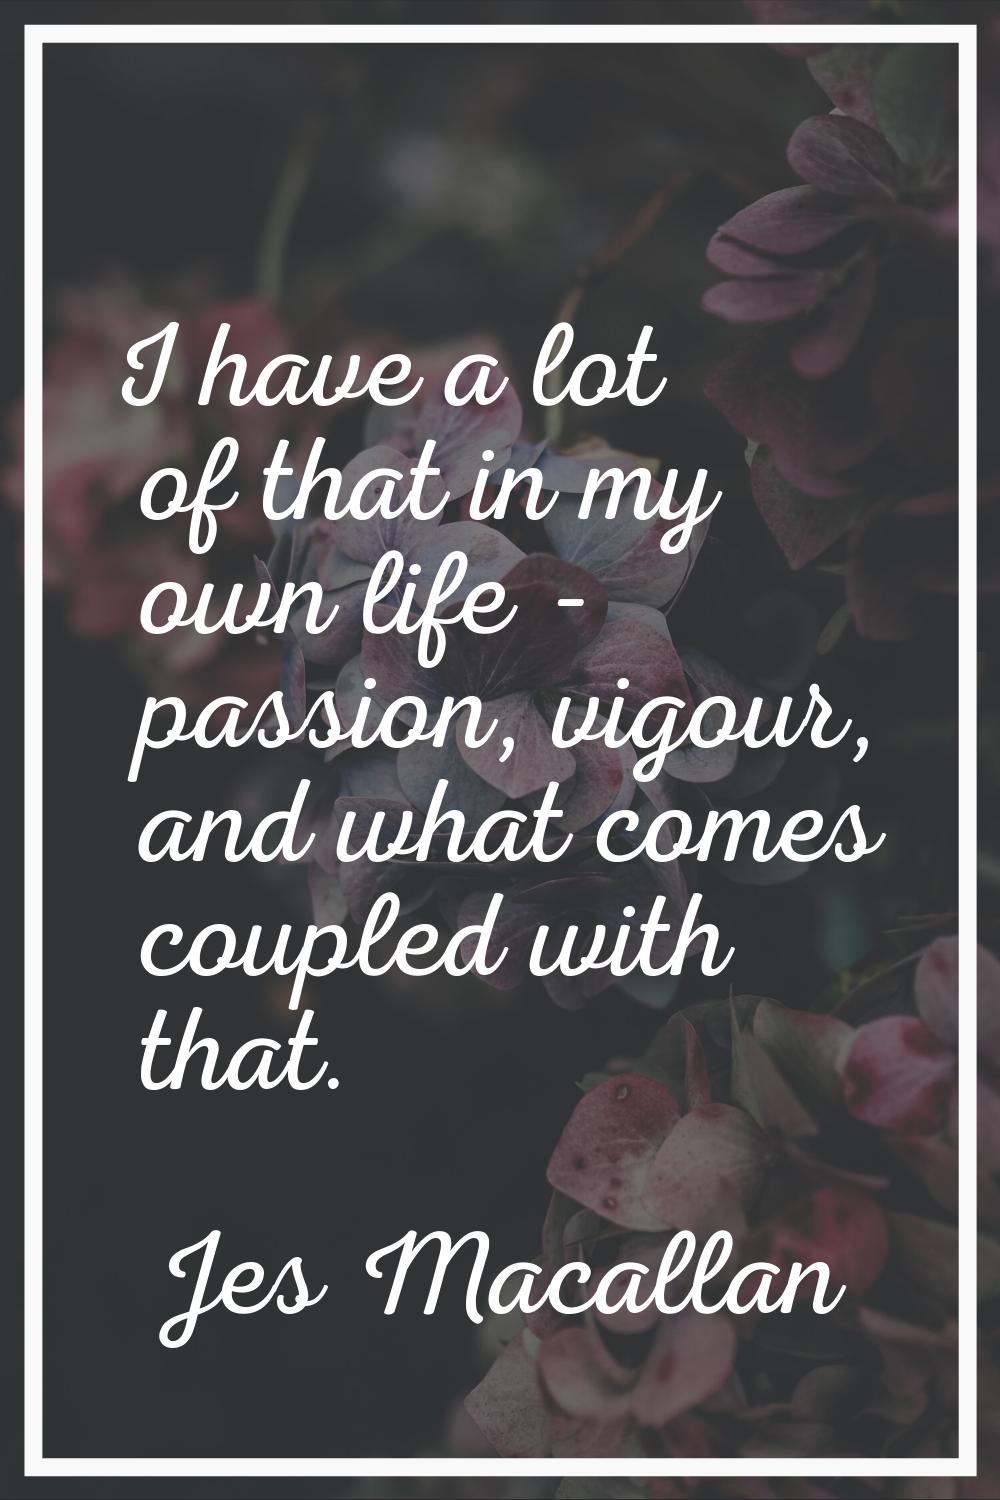 I have a lot of that in my own life - passion, vigour, and what comes coupled with that.